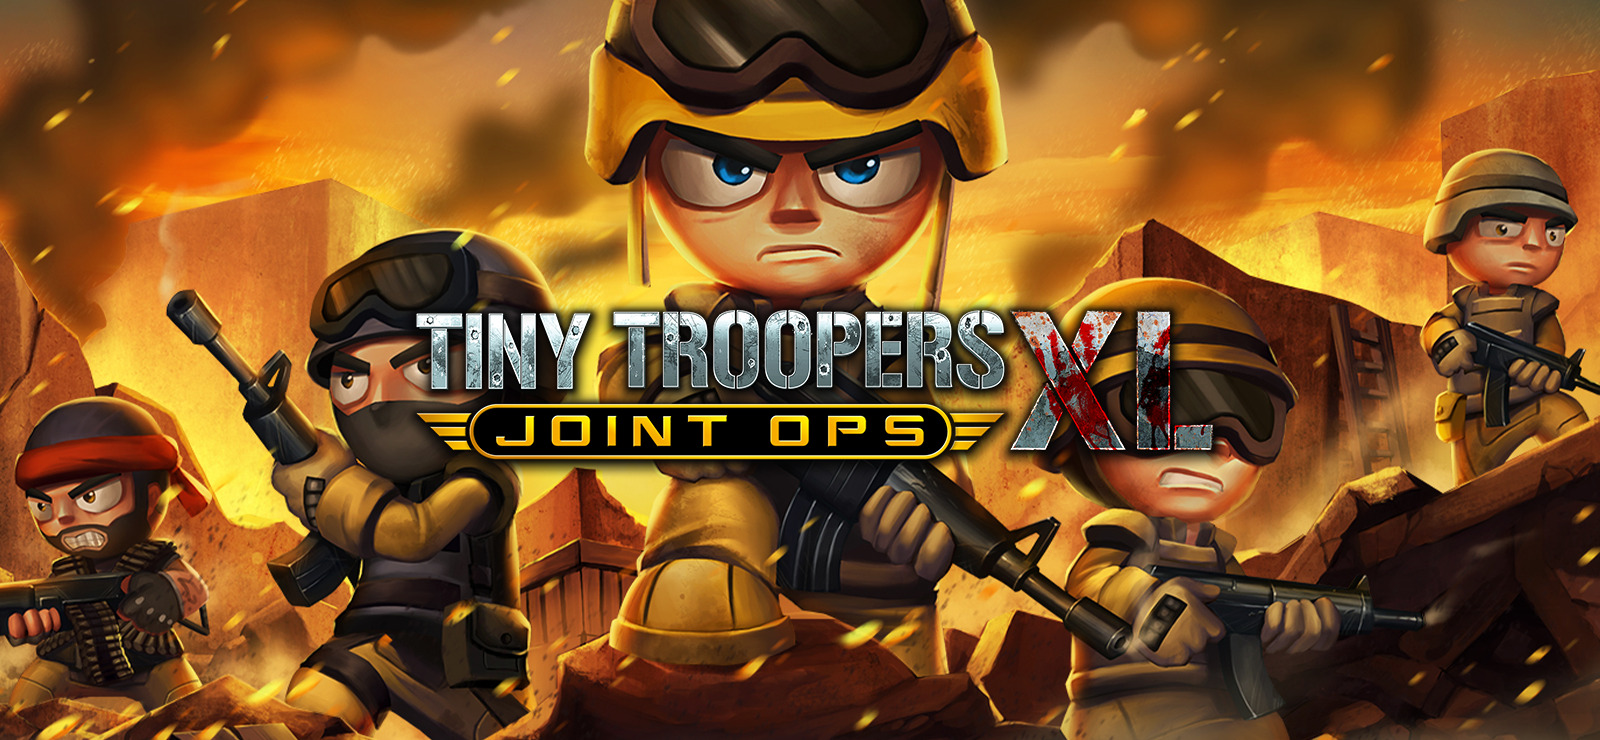 Tiny Troopers Joint Ops XL download